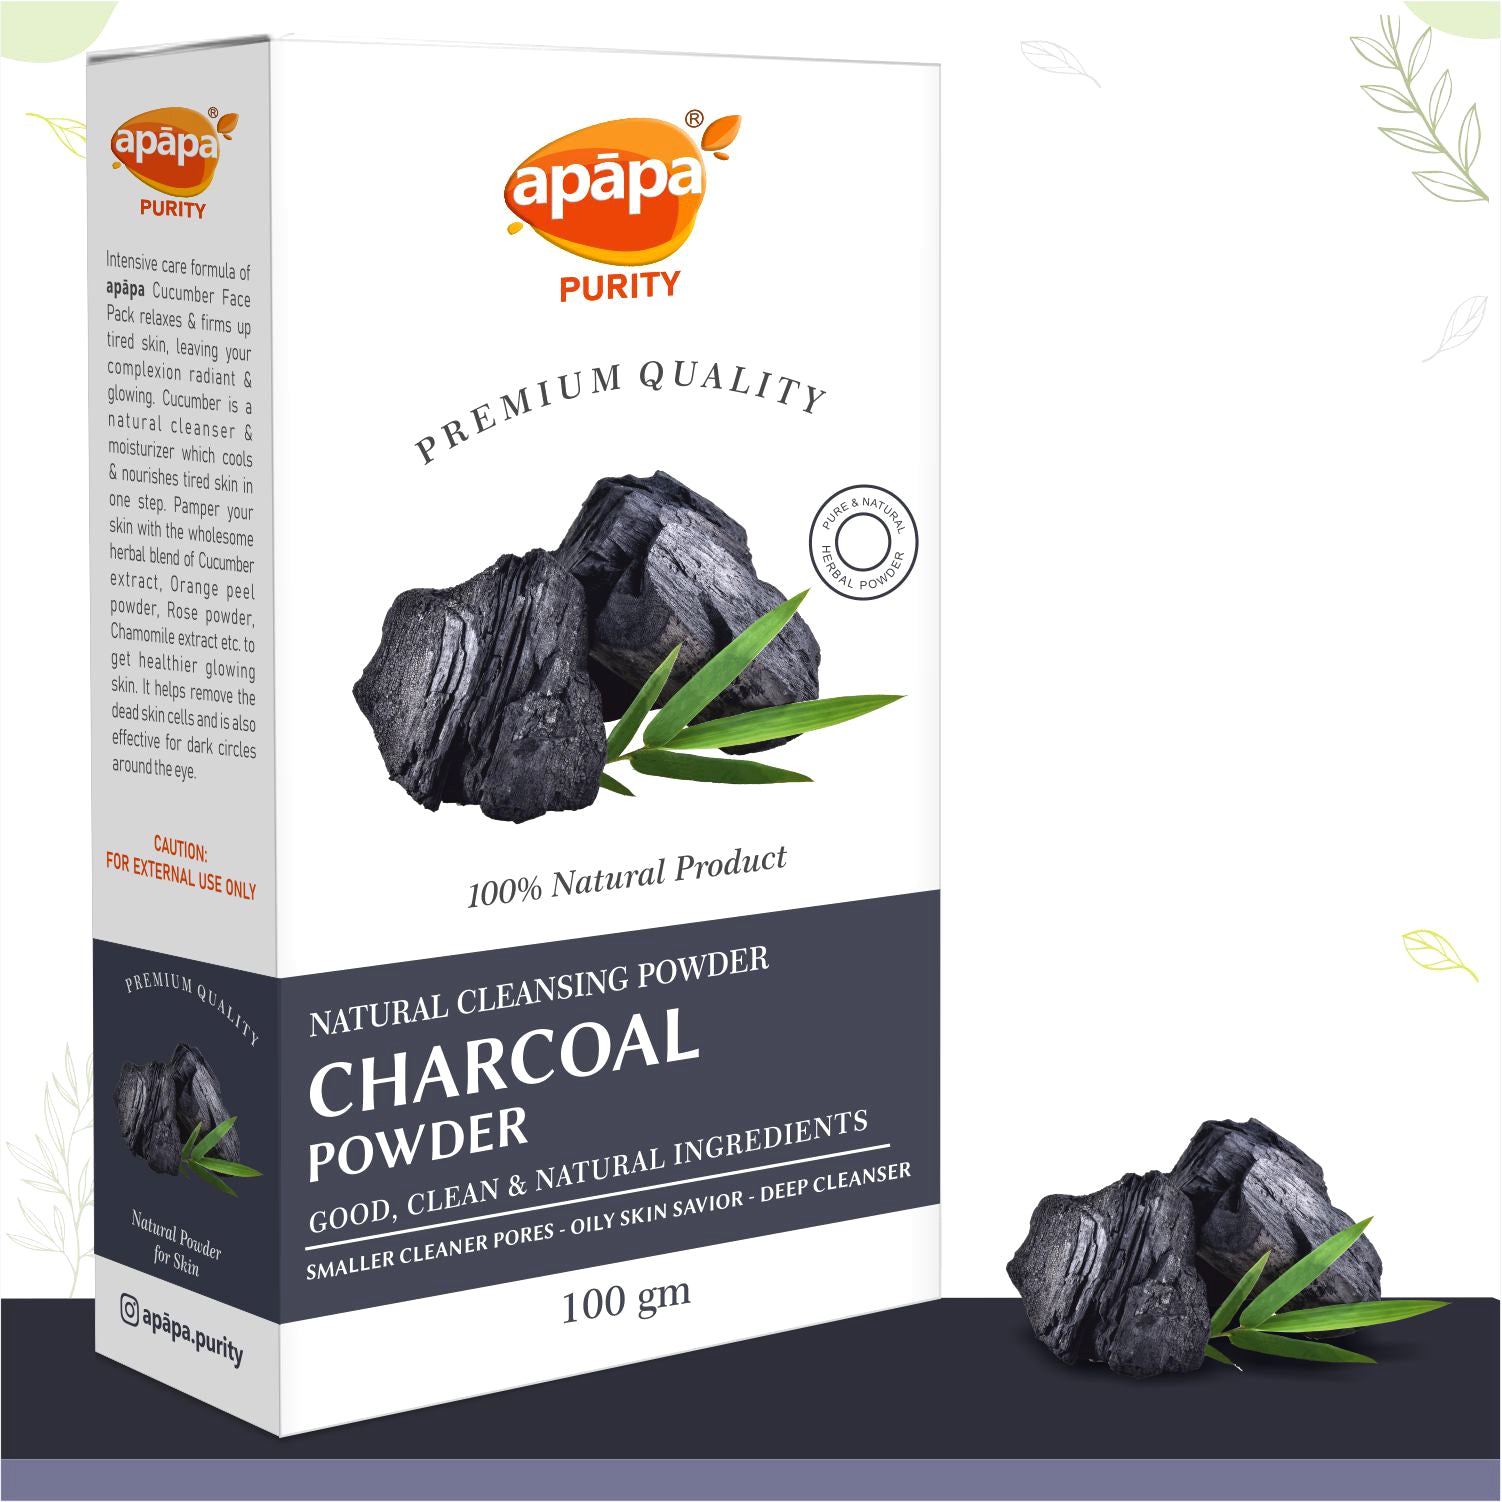 APĀPA Natural Cleansing & Exfoliating Charcoal Powder for Skin